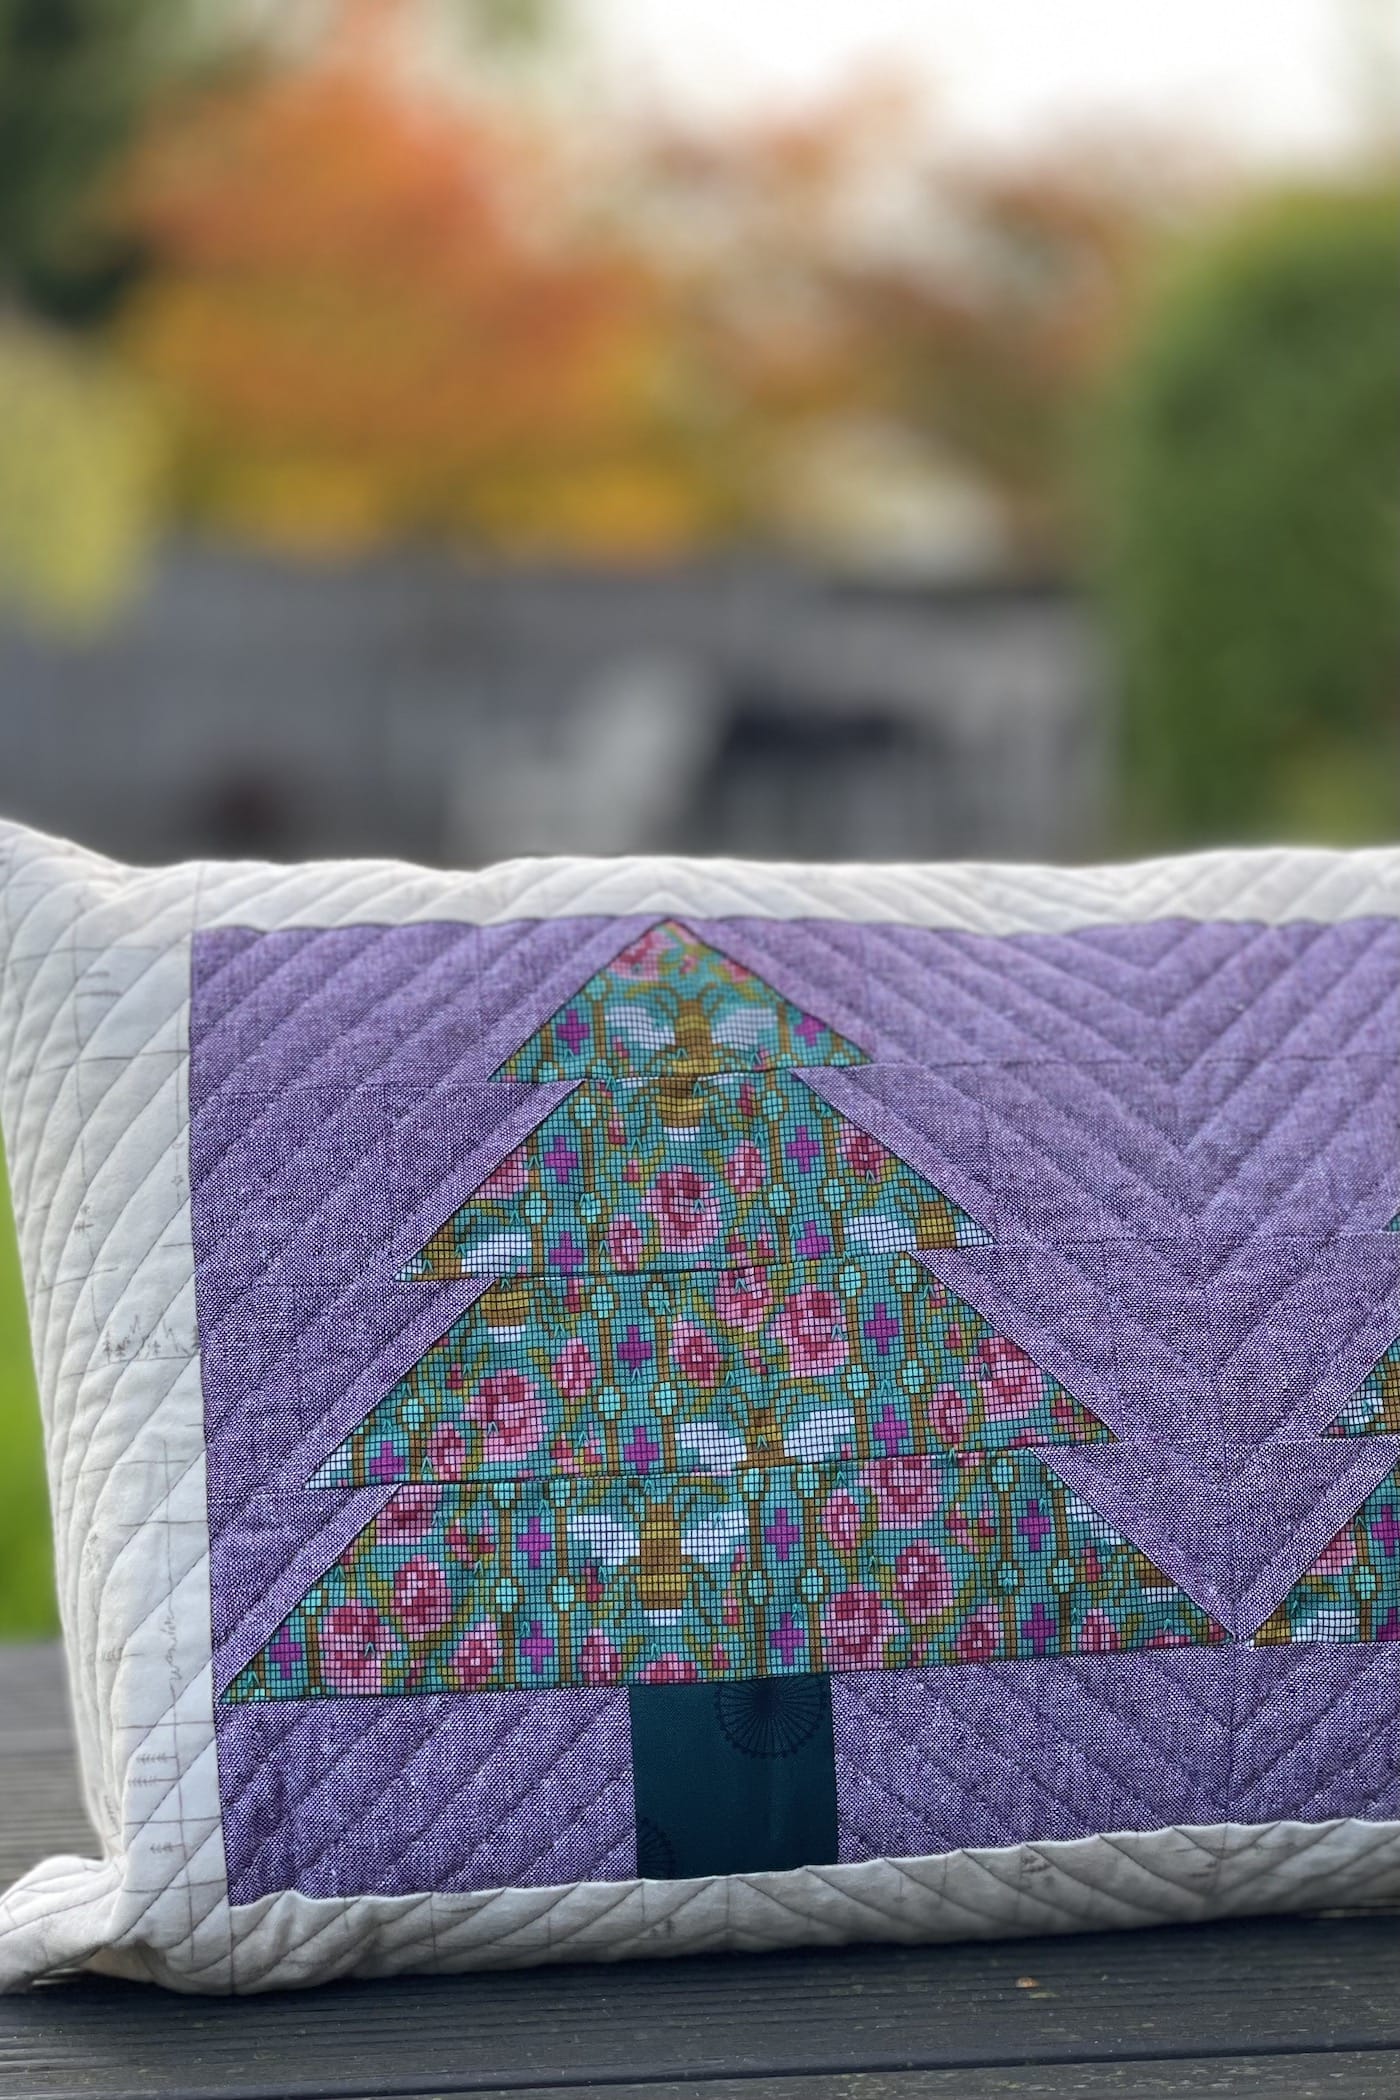 Purple and green pillow with patchwork pieced evergreen trees outdoors